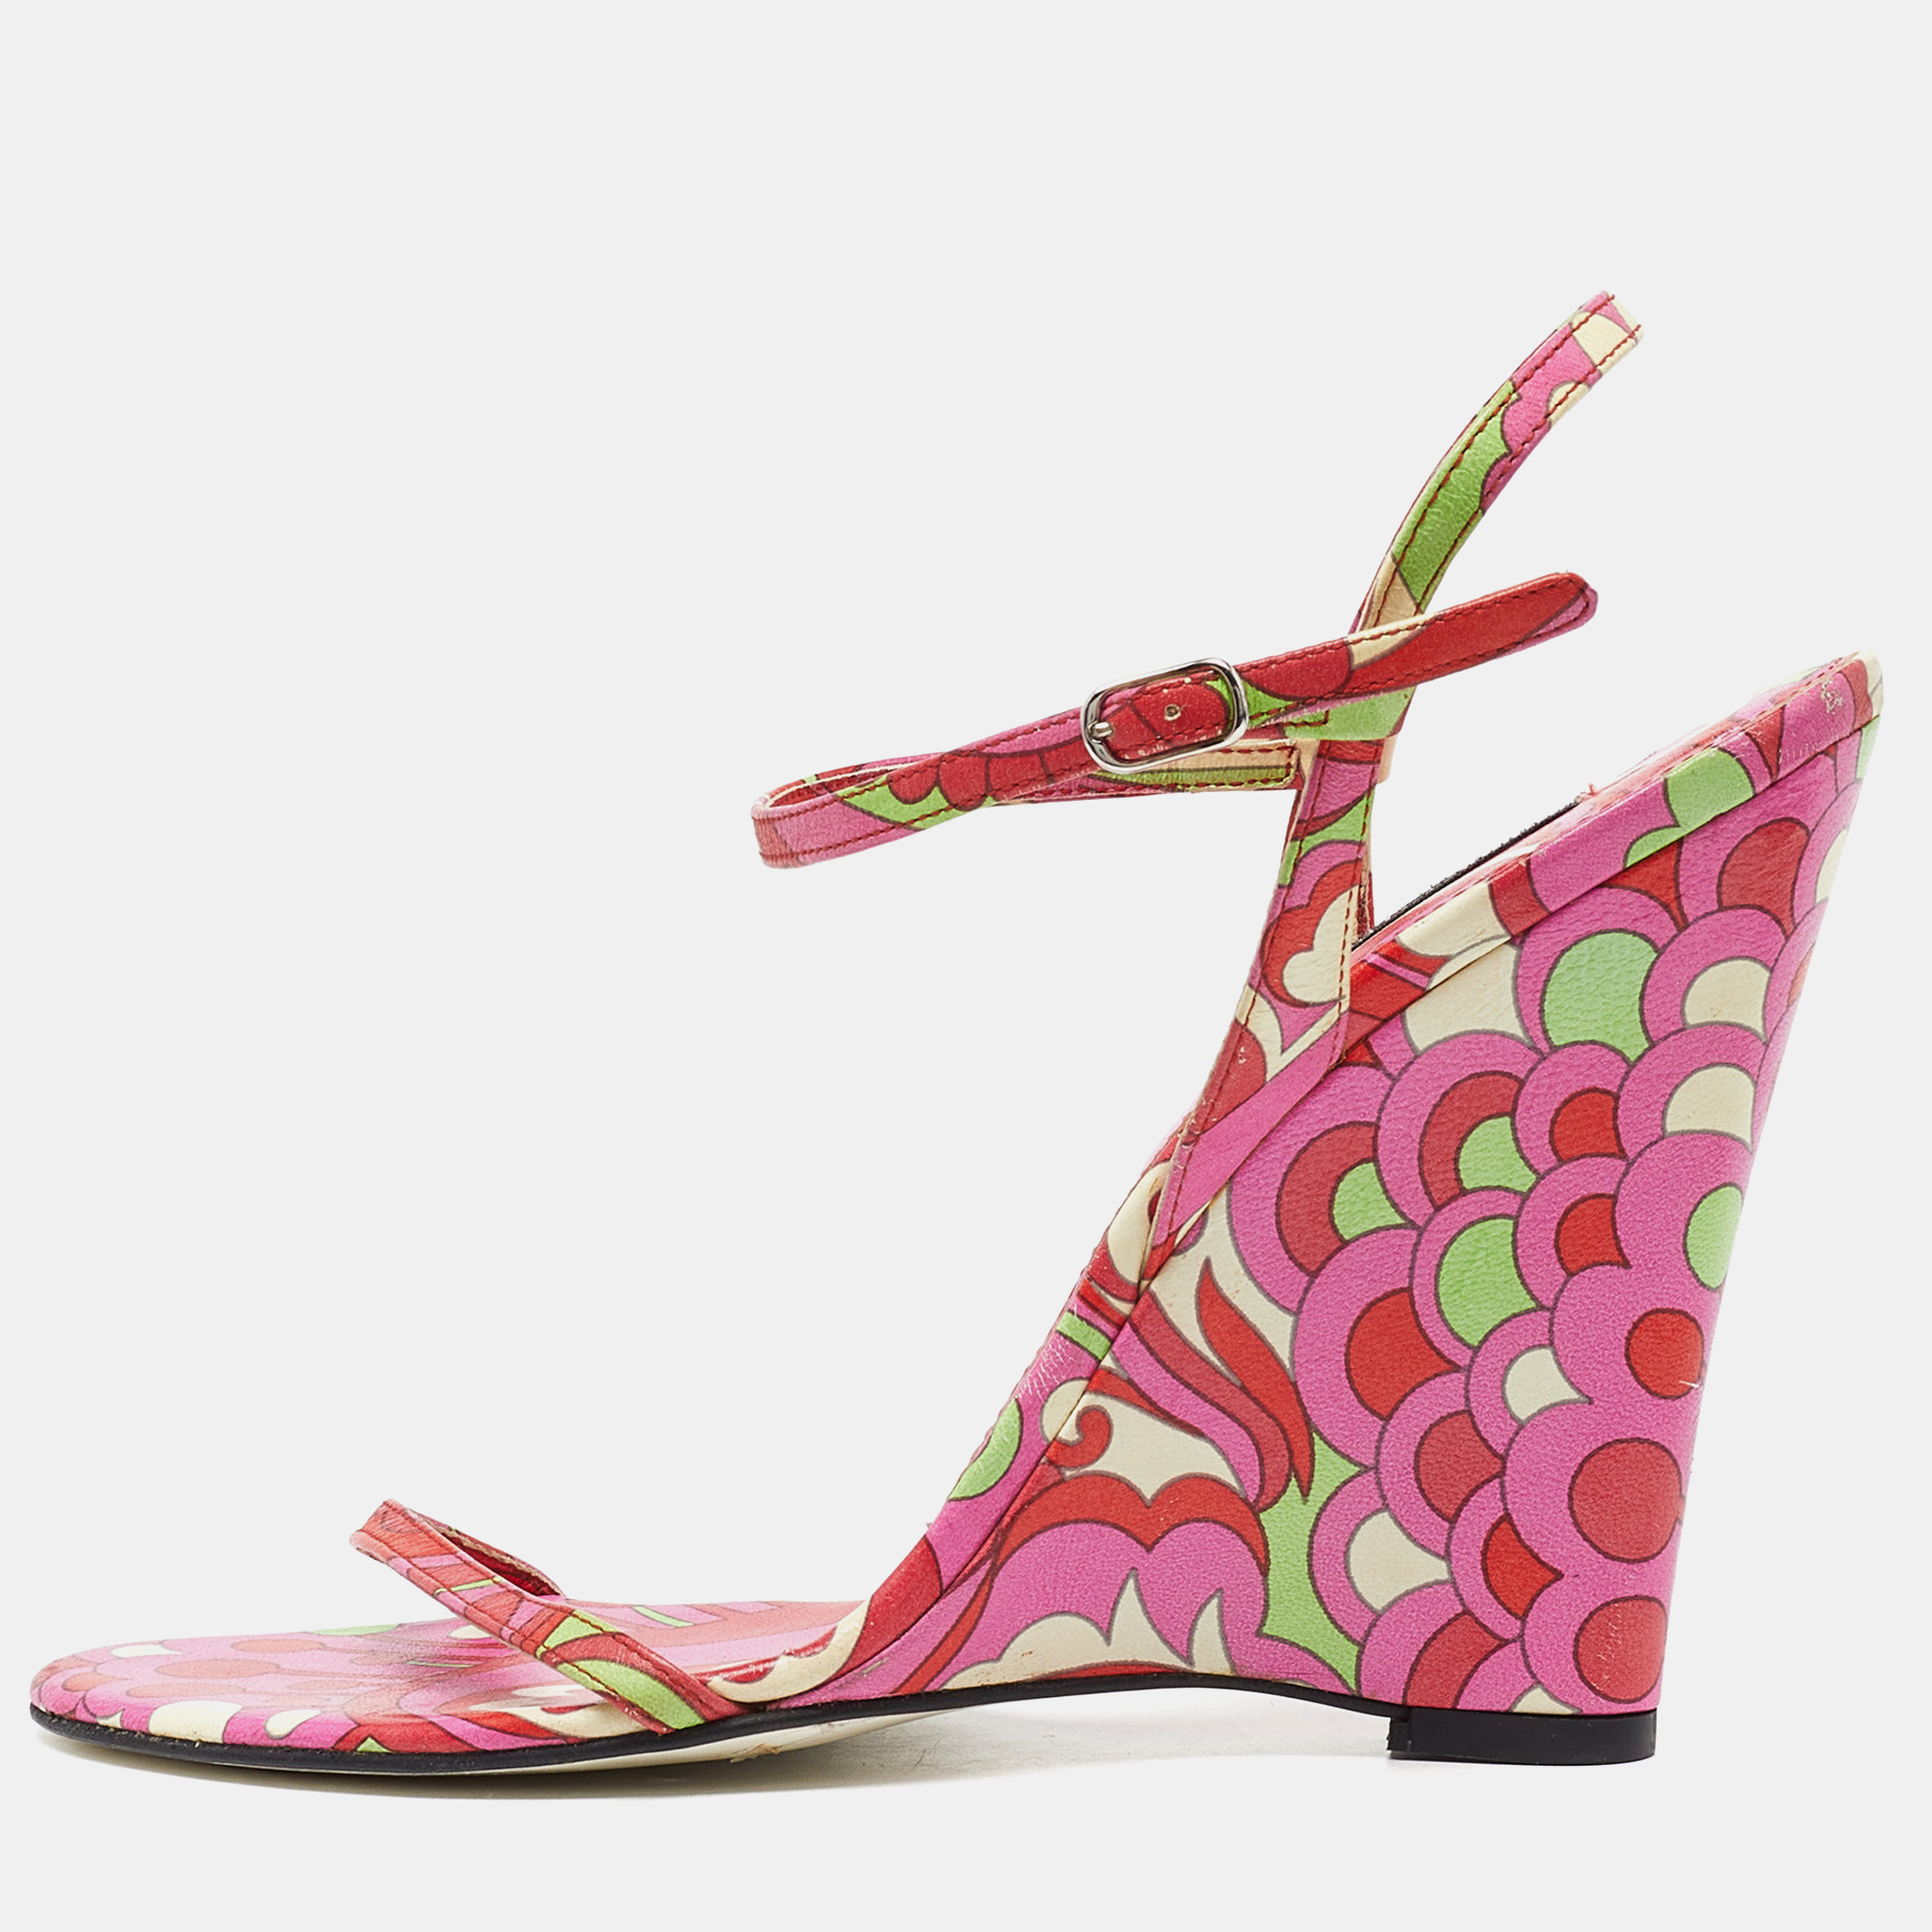 Pre-owned Dolce & Gabbana Multicolor Print Leather Wedge Sandals Size 38.5